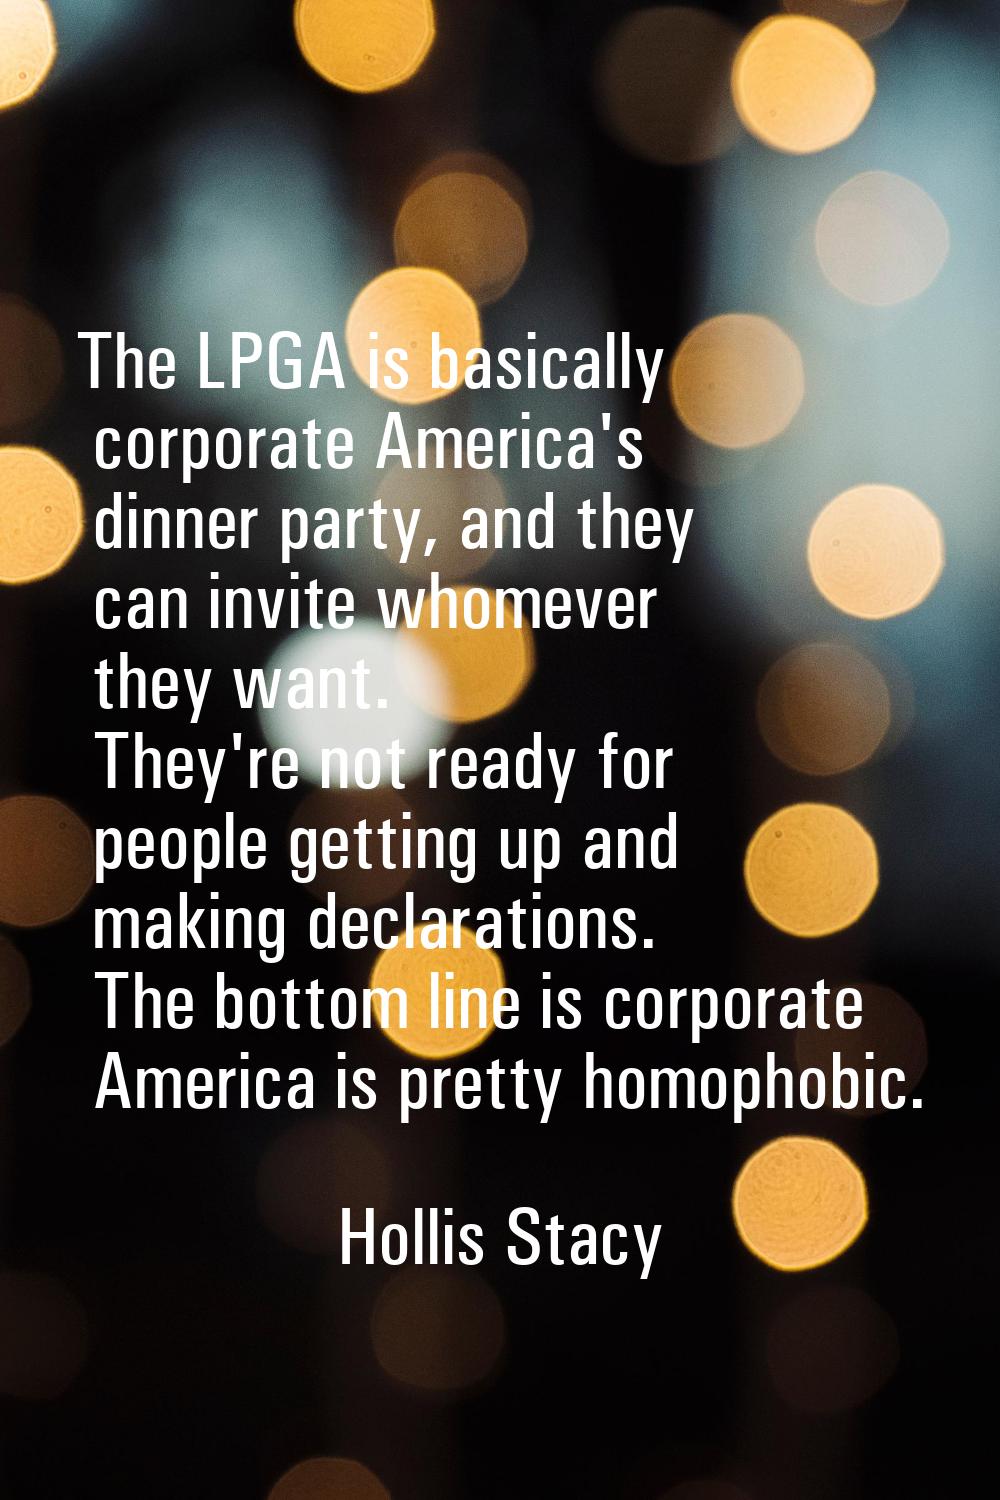 The LPGA is basically corporate America's dinner party, and they can invite whomever they want. The